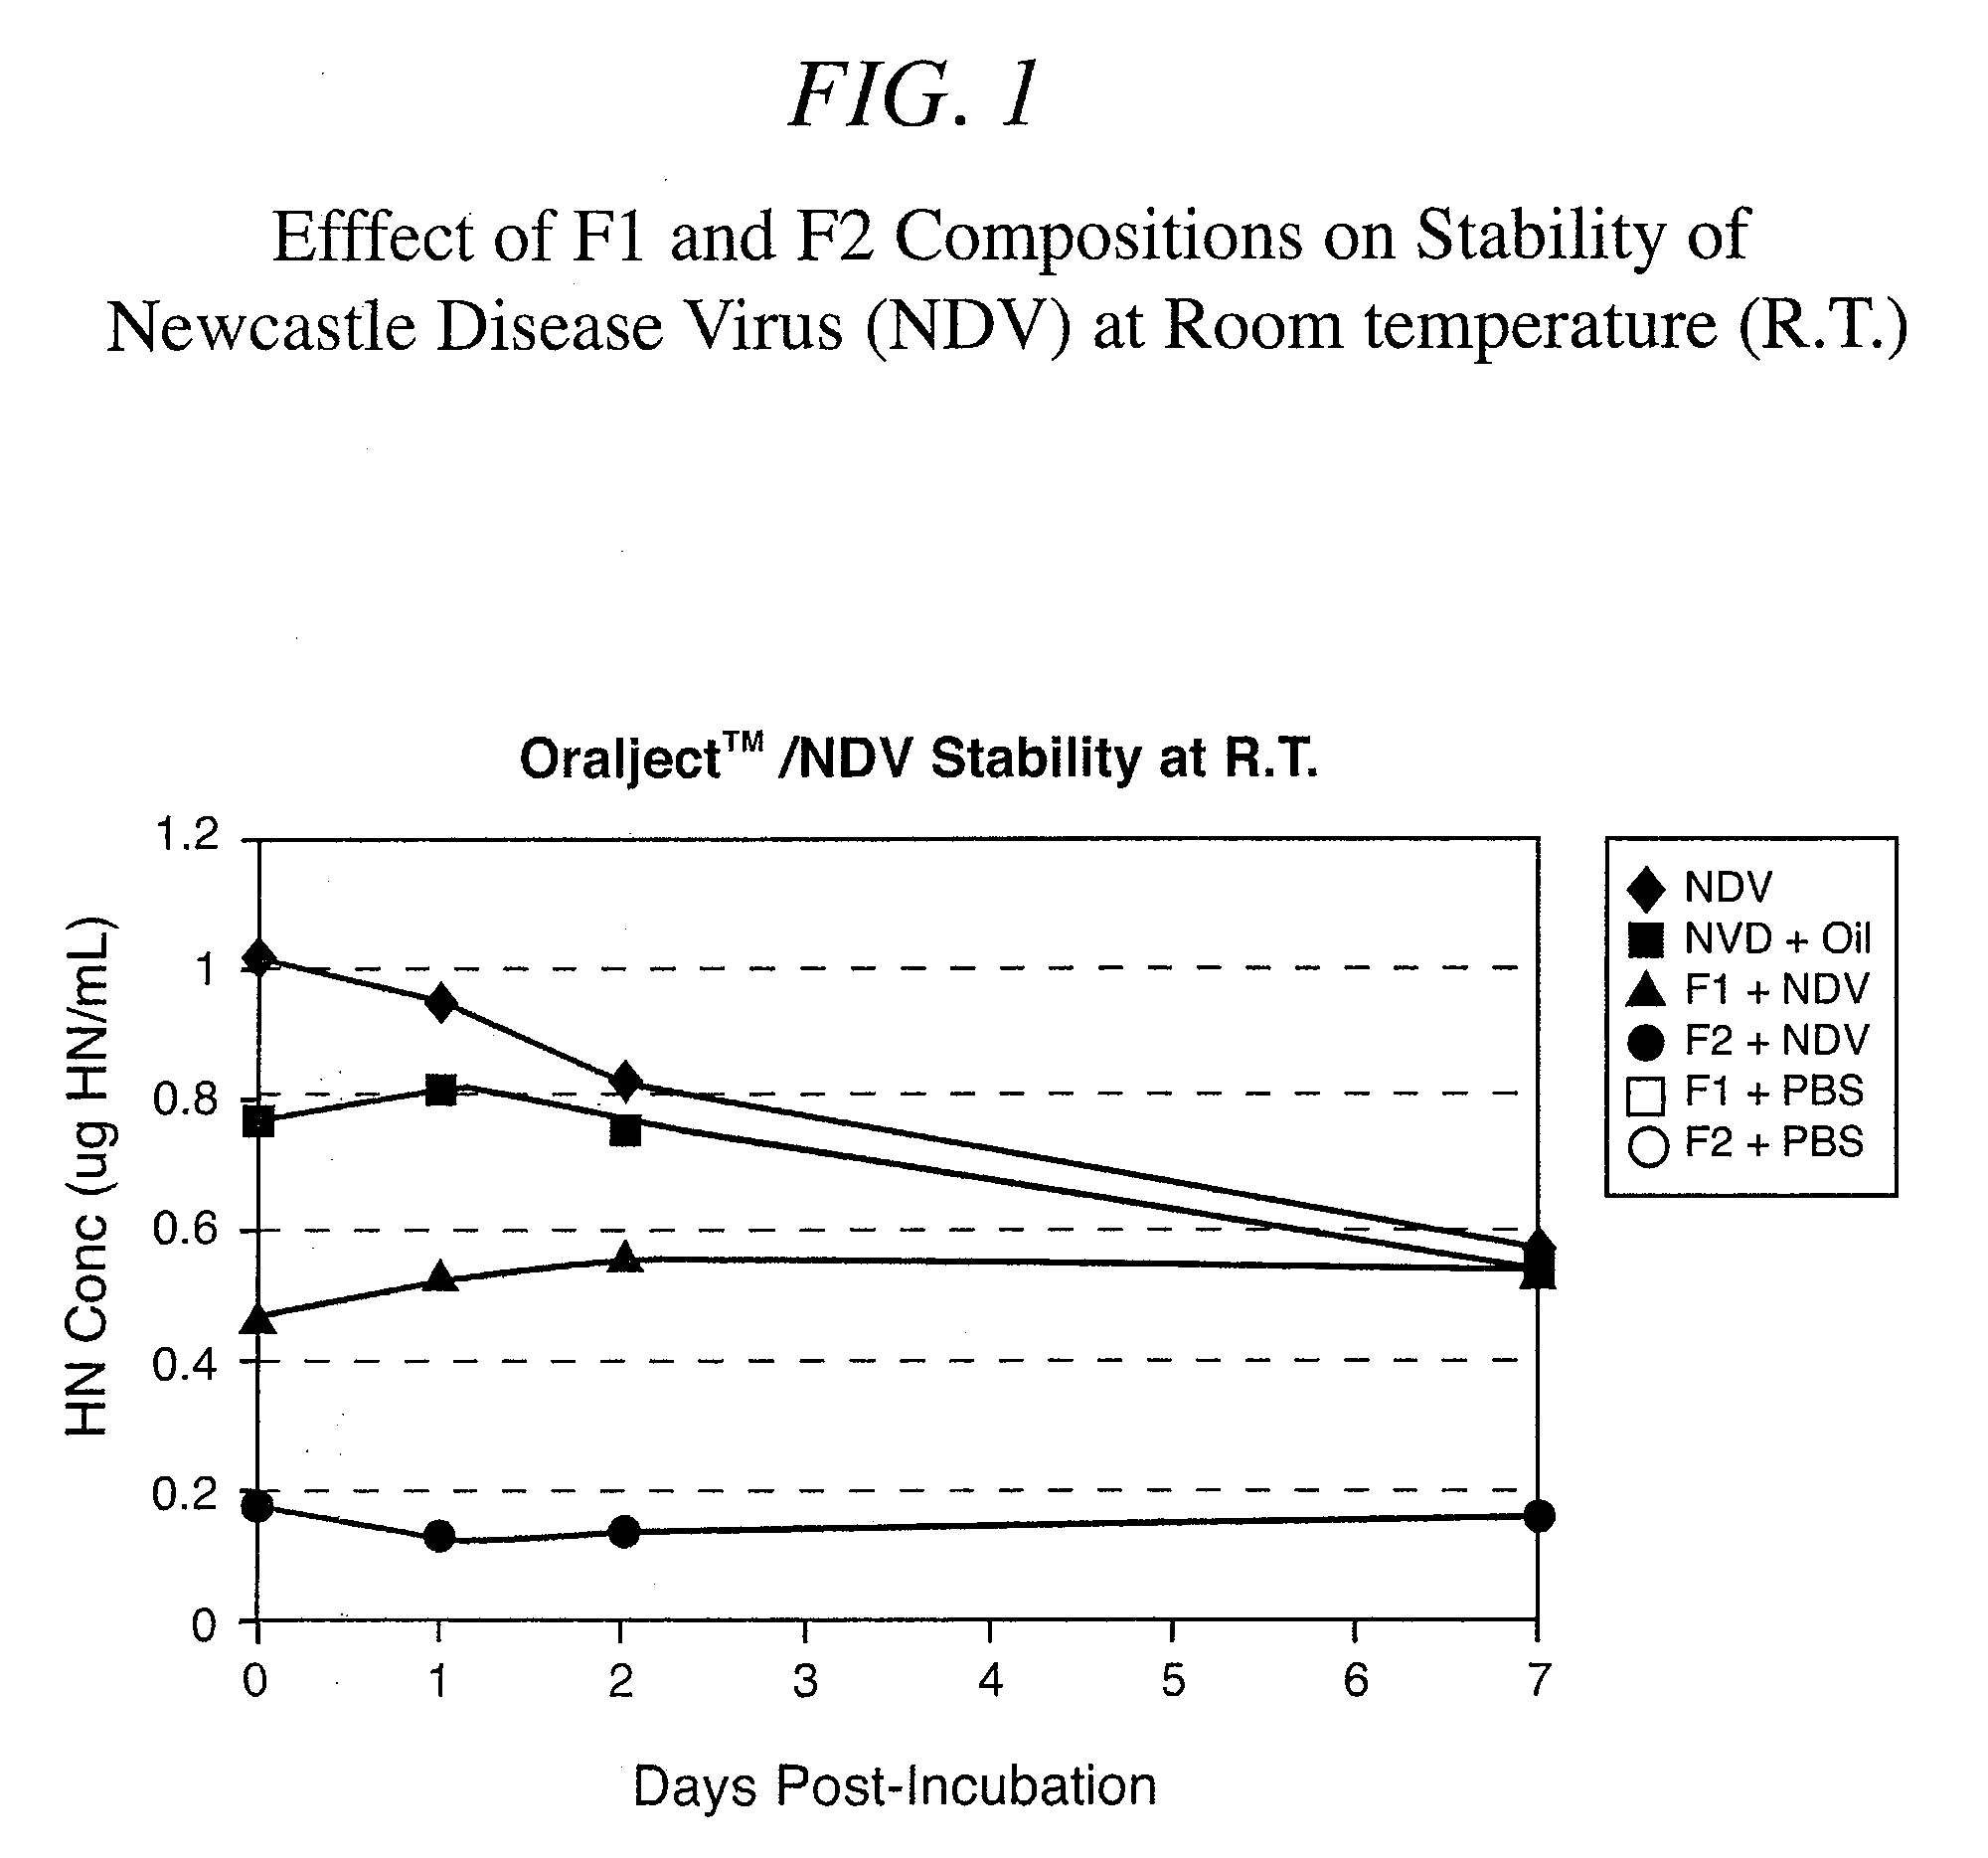 Immunoactive Compositions for Improved Oral Delivery of Vaccines and Therapeutic Agents